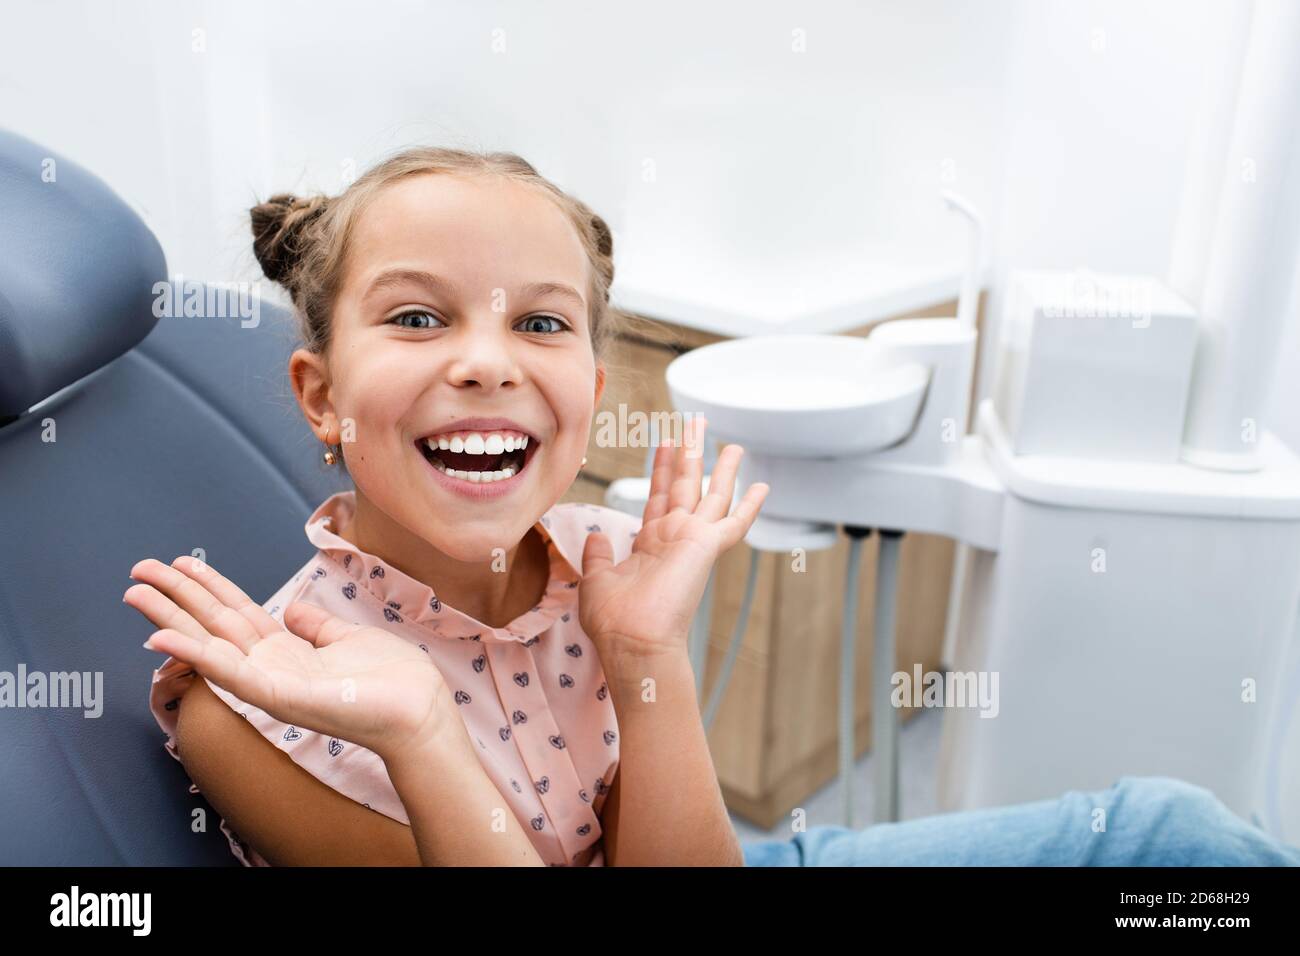 Very happy emotional child sitting on a dental chair and showing perfect healthy white smiling. Kid teeth treatment Stock Photo